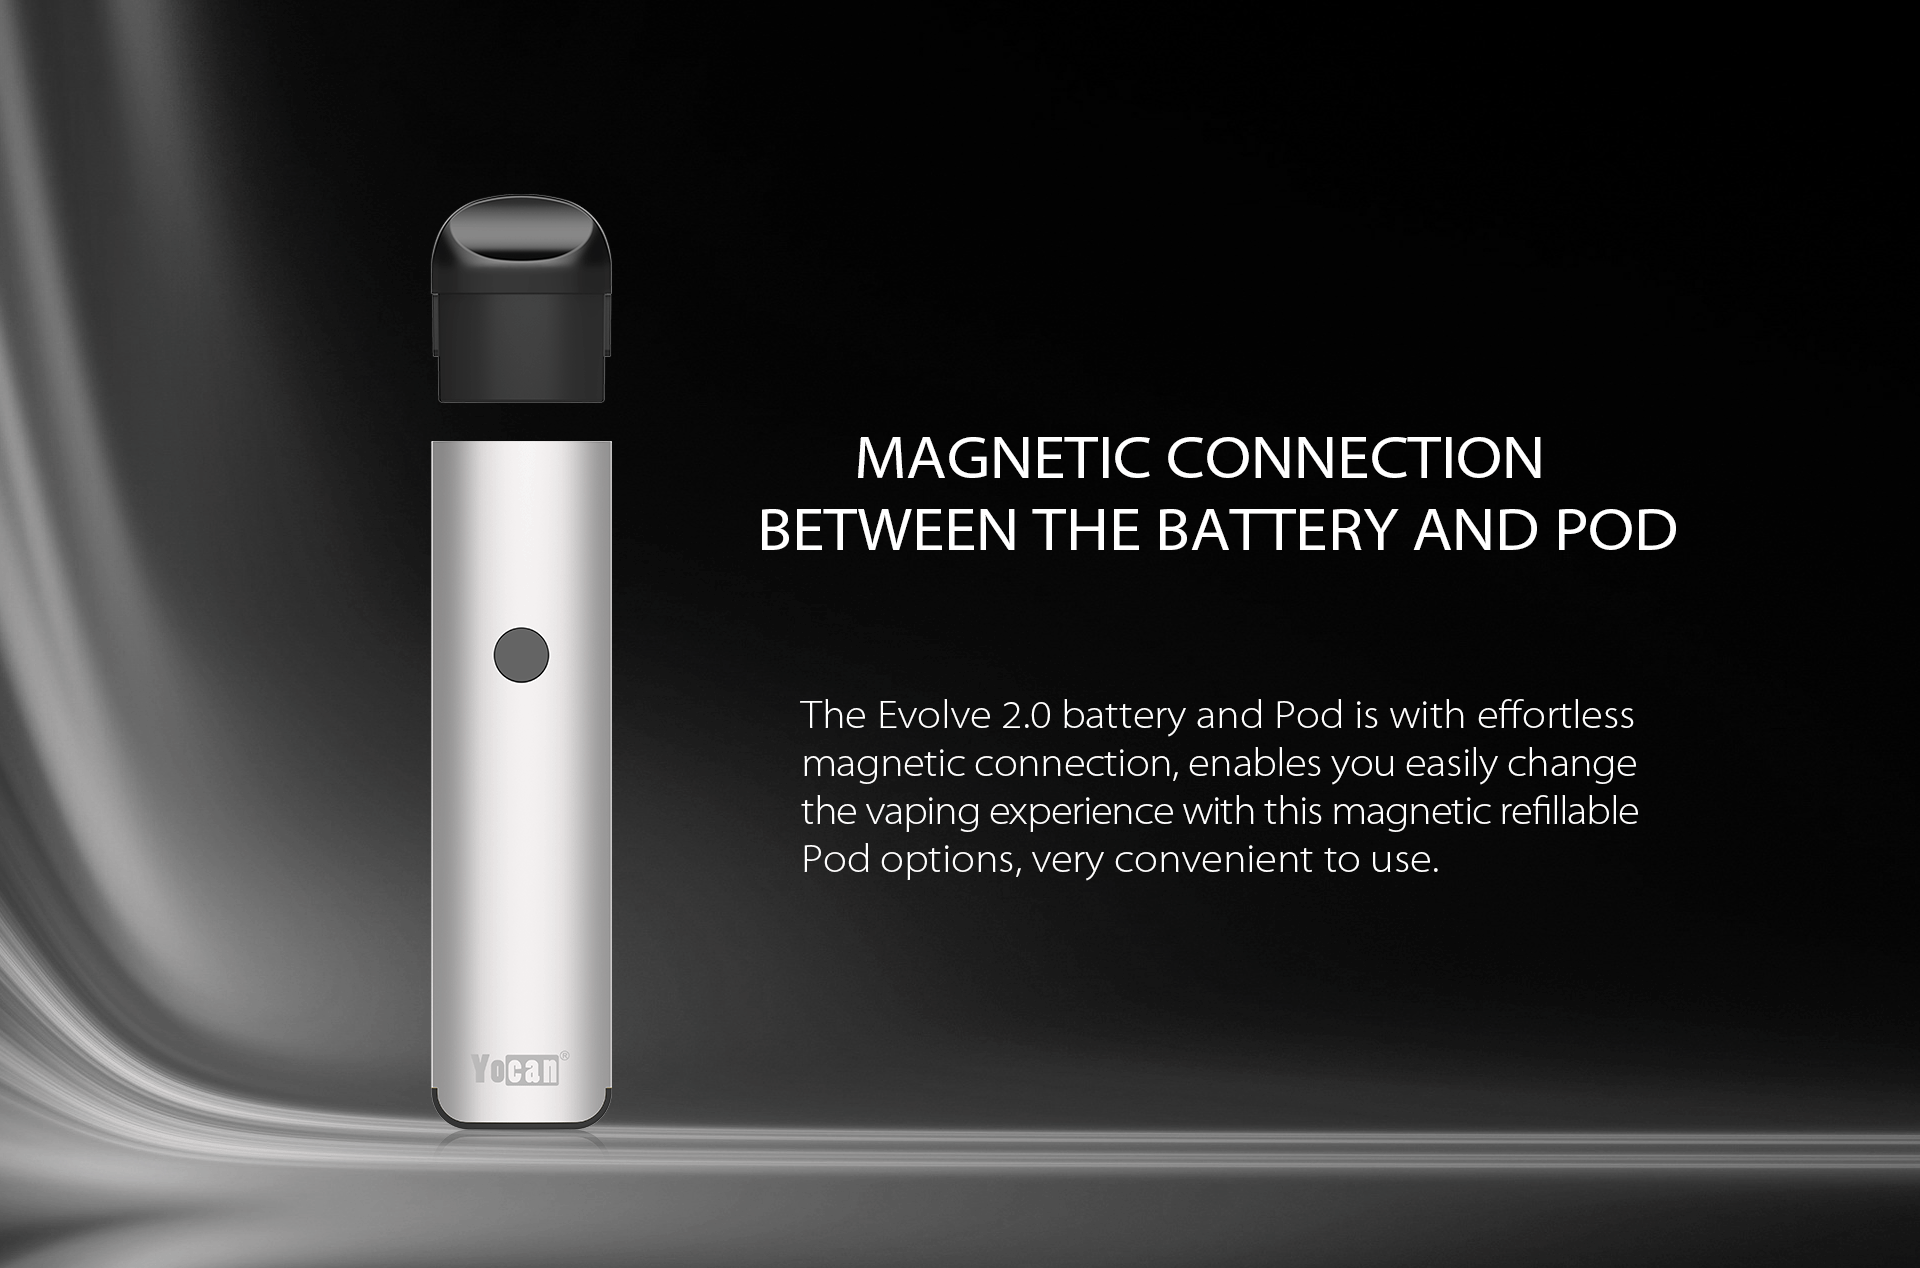 Yocan Evolve 2.0 features Magnetic Connection Between the Battery and Pod